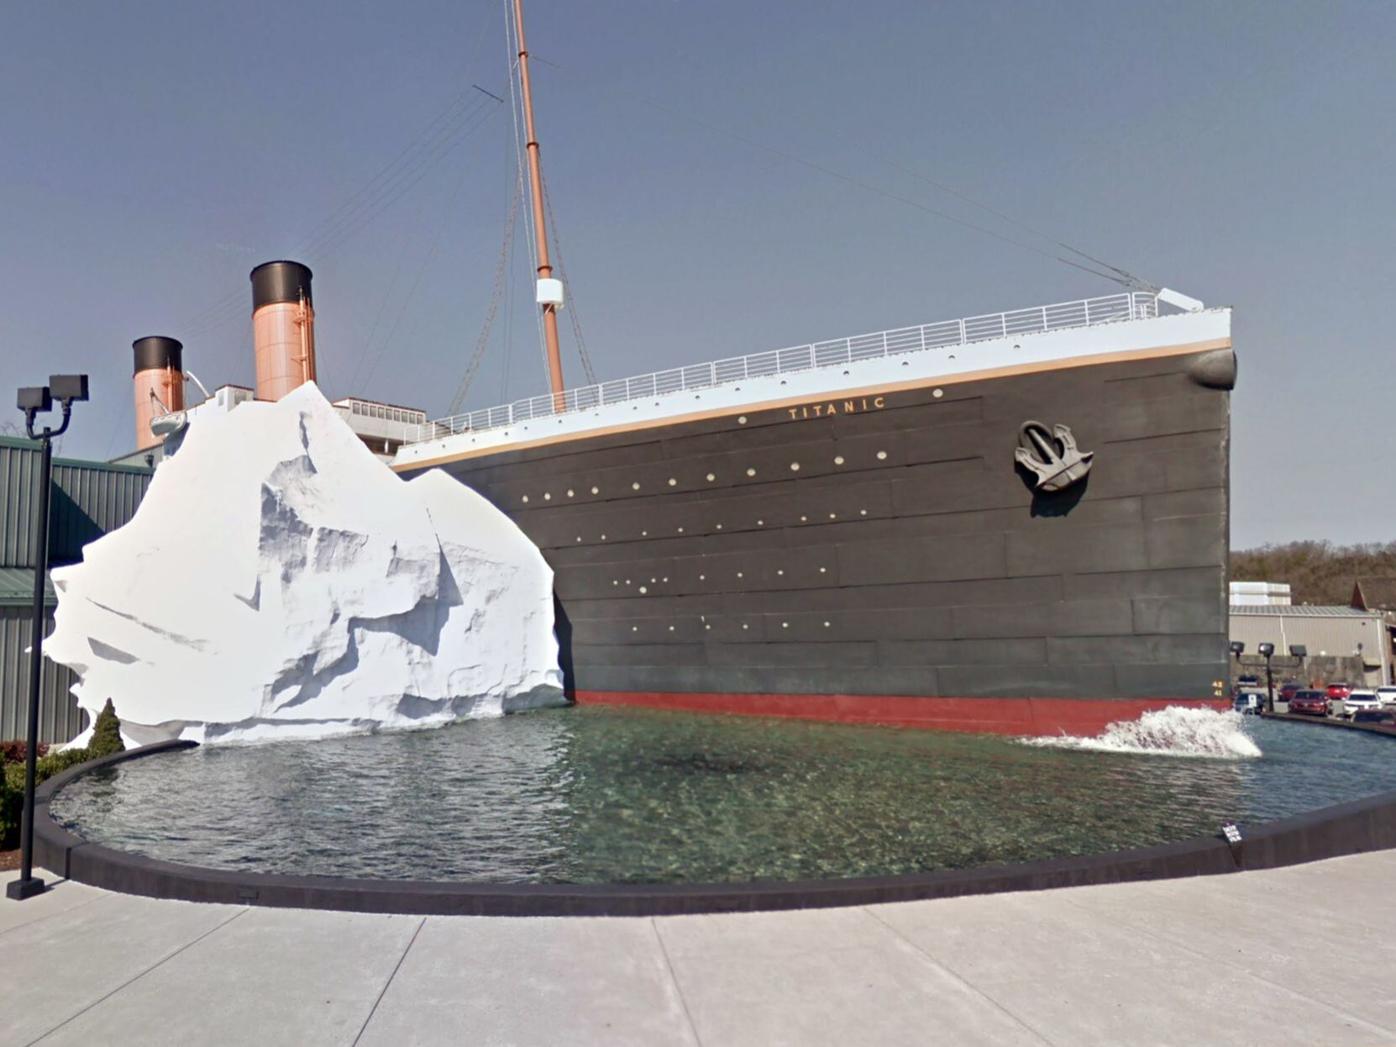 Visiting the Largest Titanic Museum Attraction {Pigeon Forge, TN